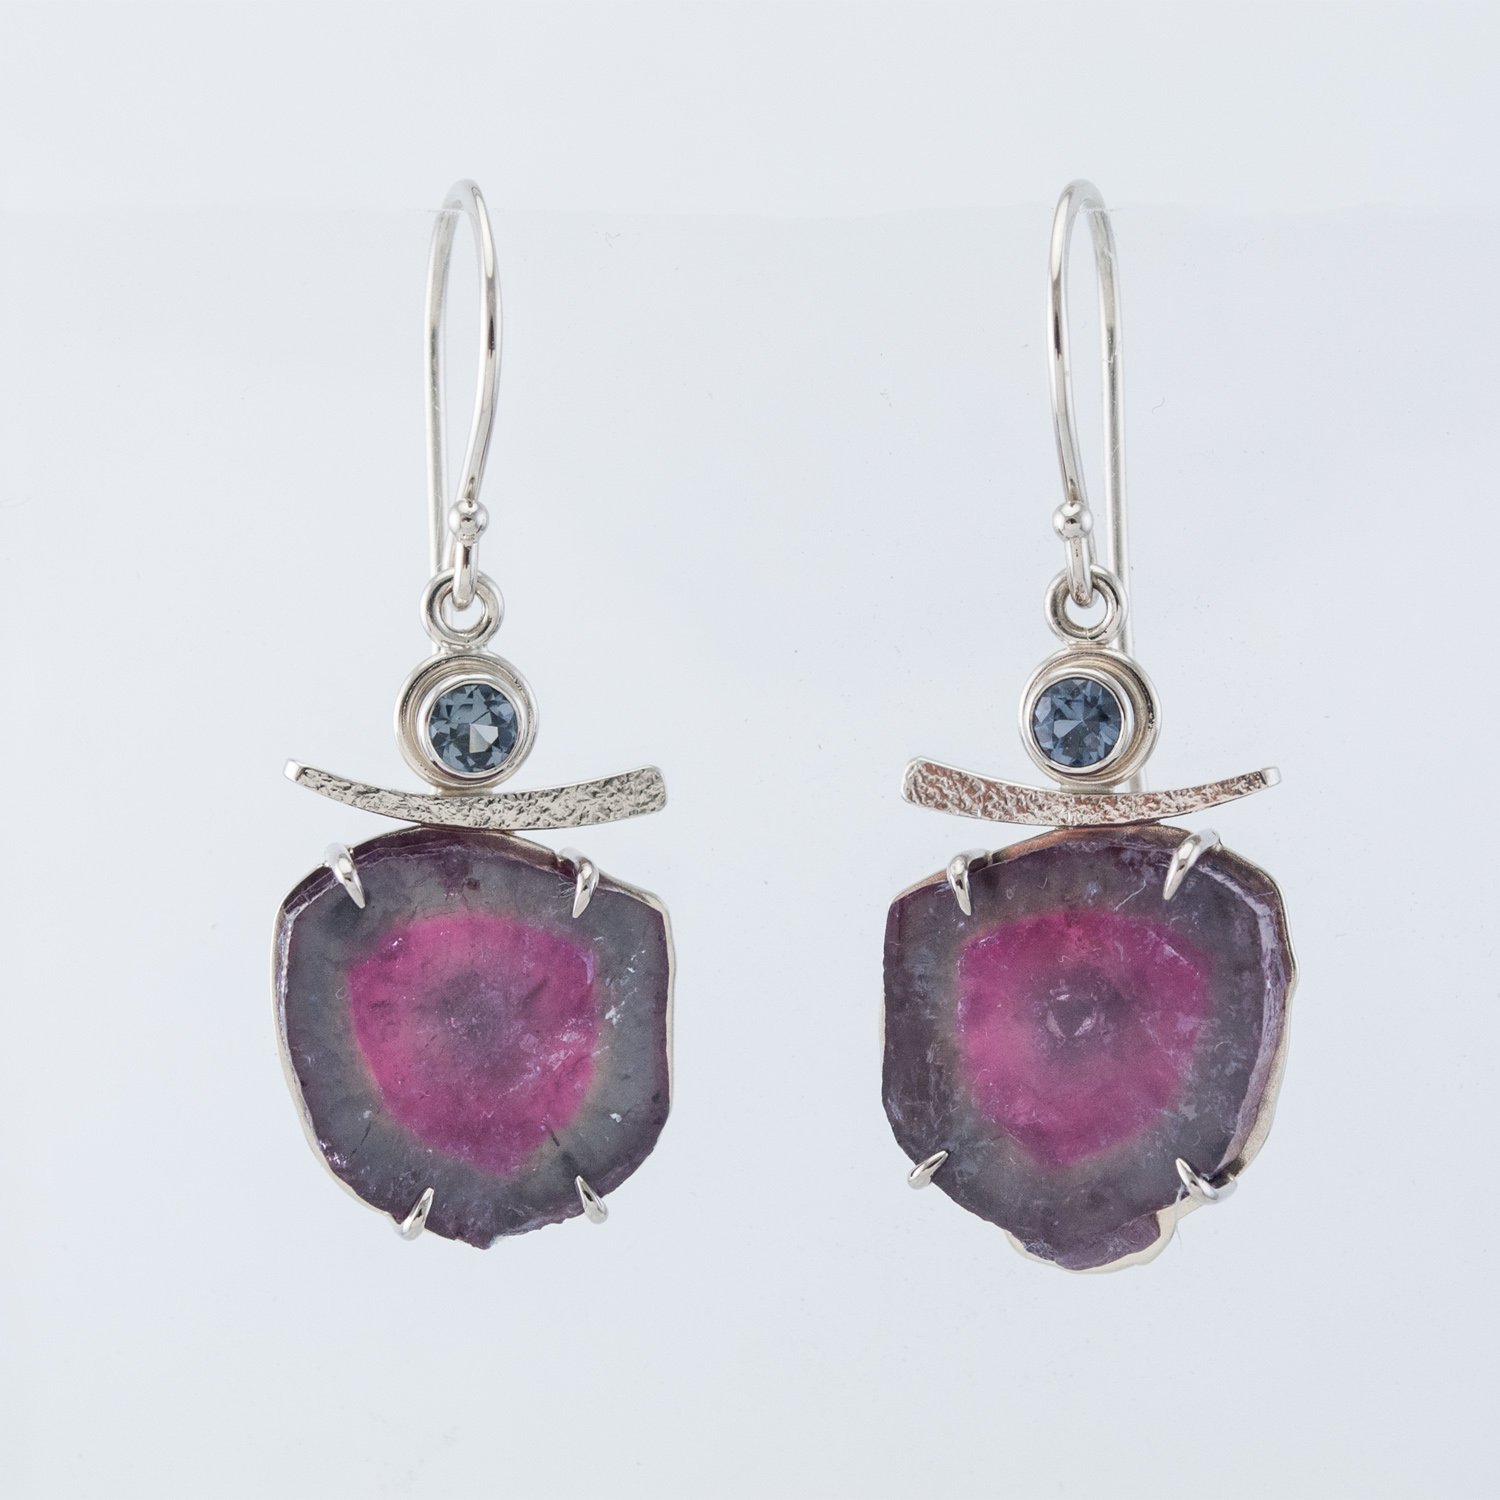 Earrings - Shop — Fairbank and Perry Goldsmiths